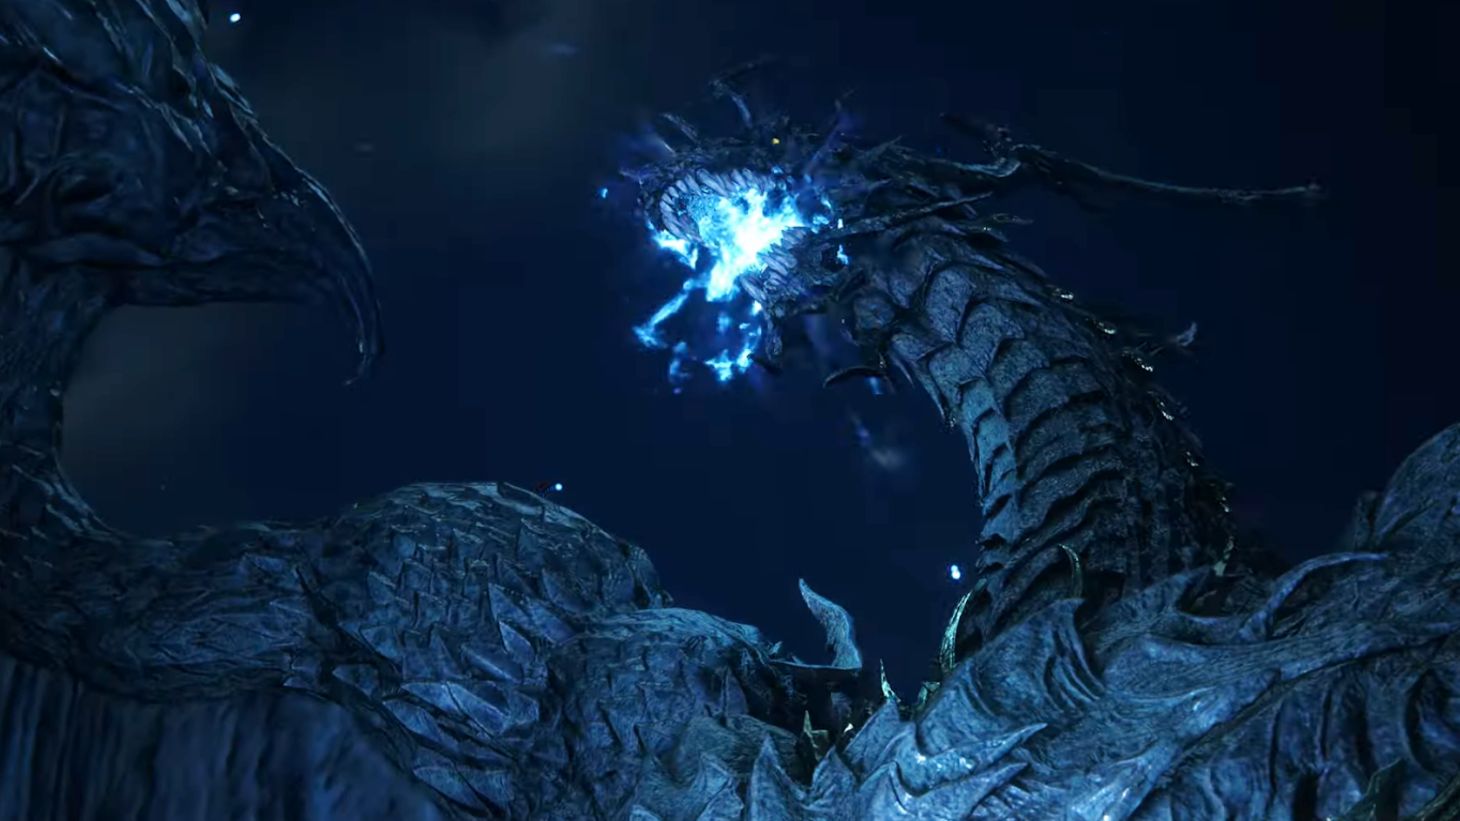 Final Fantasy 16 Eikons: Bahamut can be seen